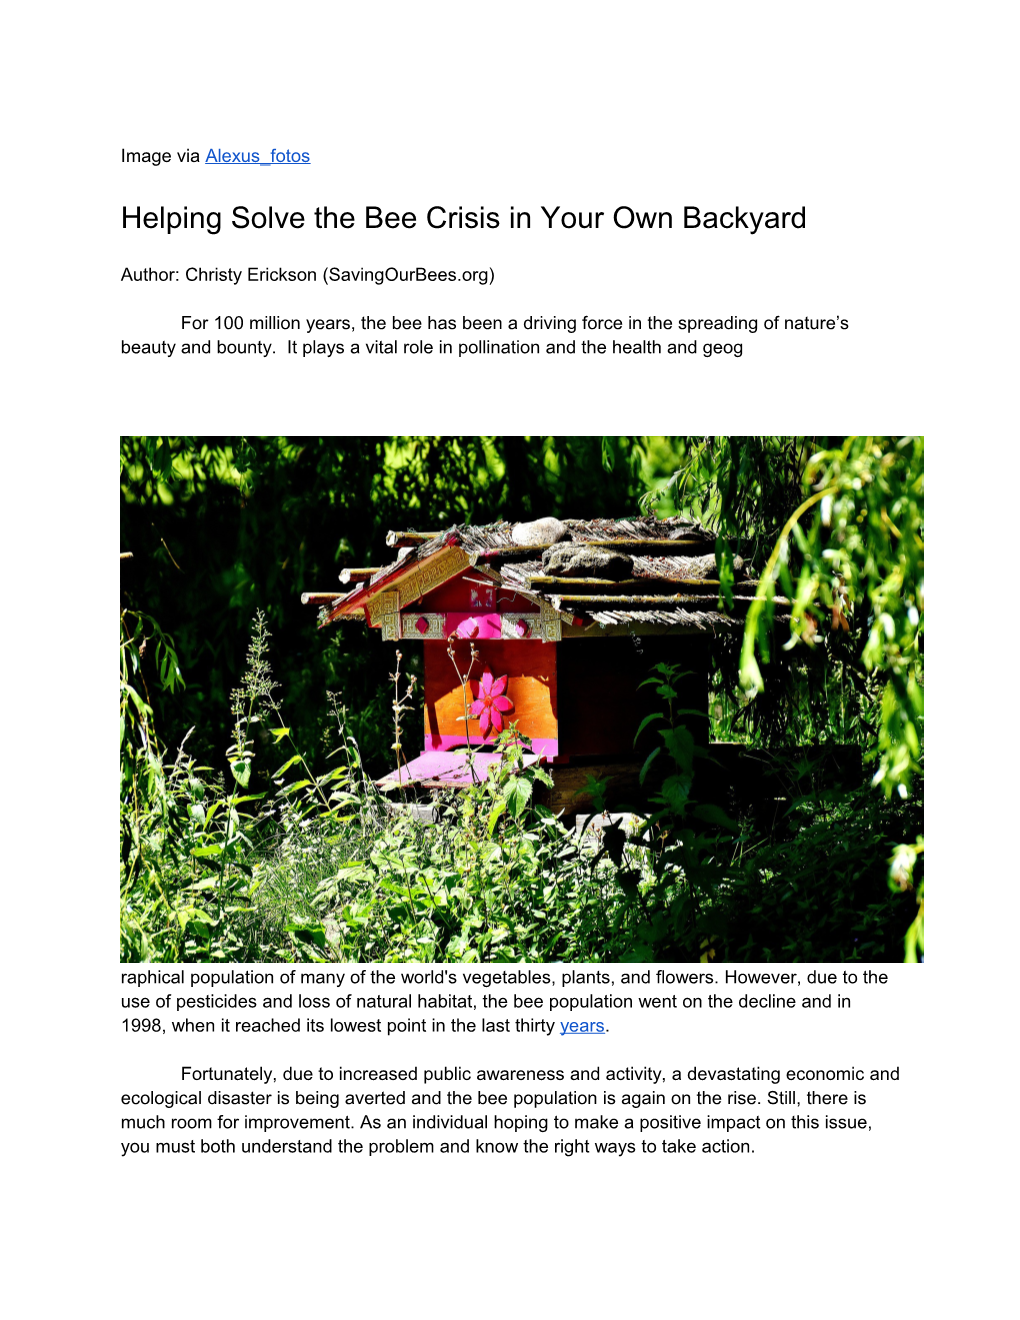 Helping Solve the Bee Crisis in Your Own Backyard